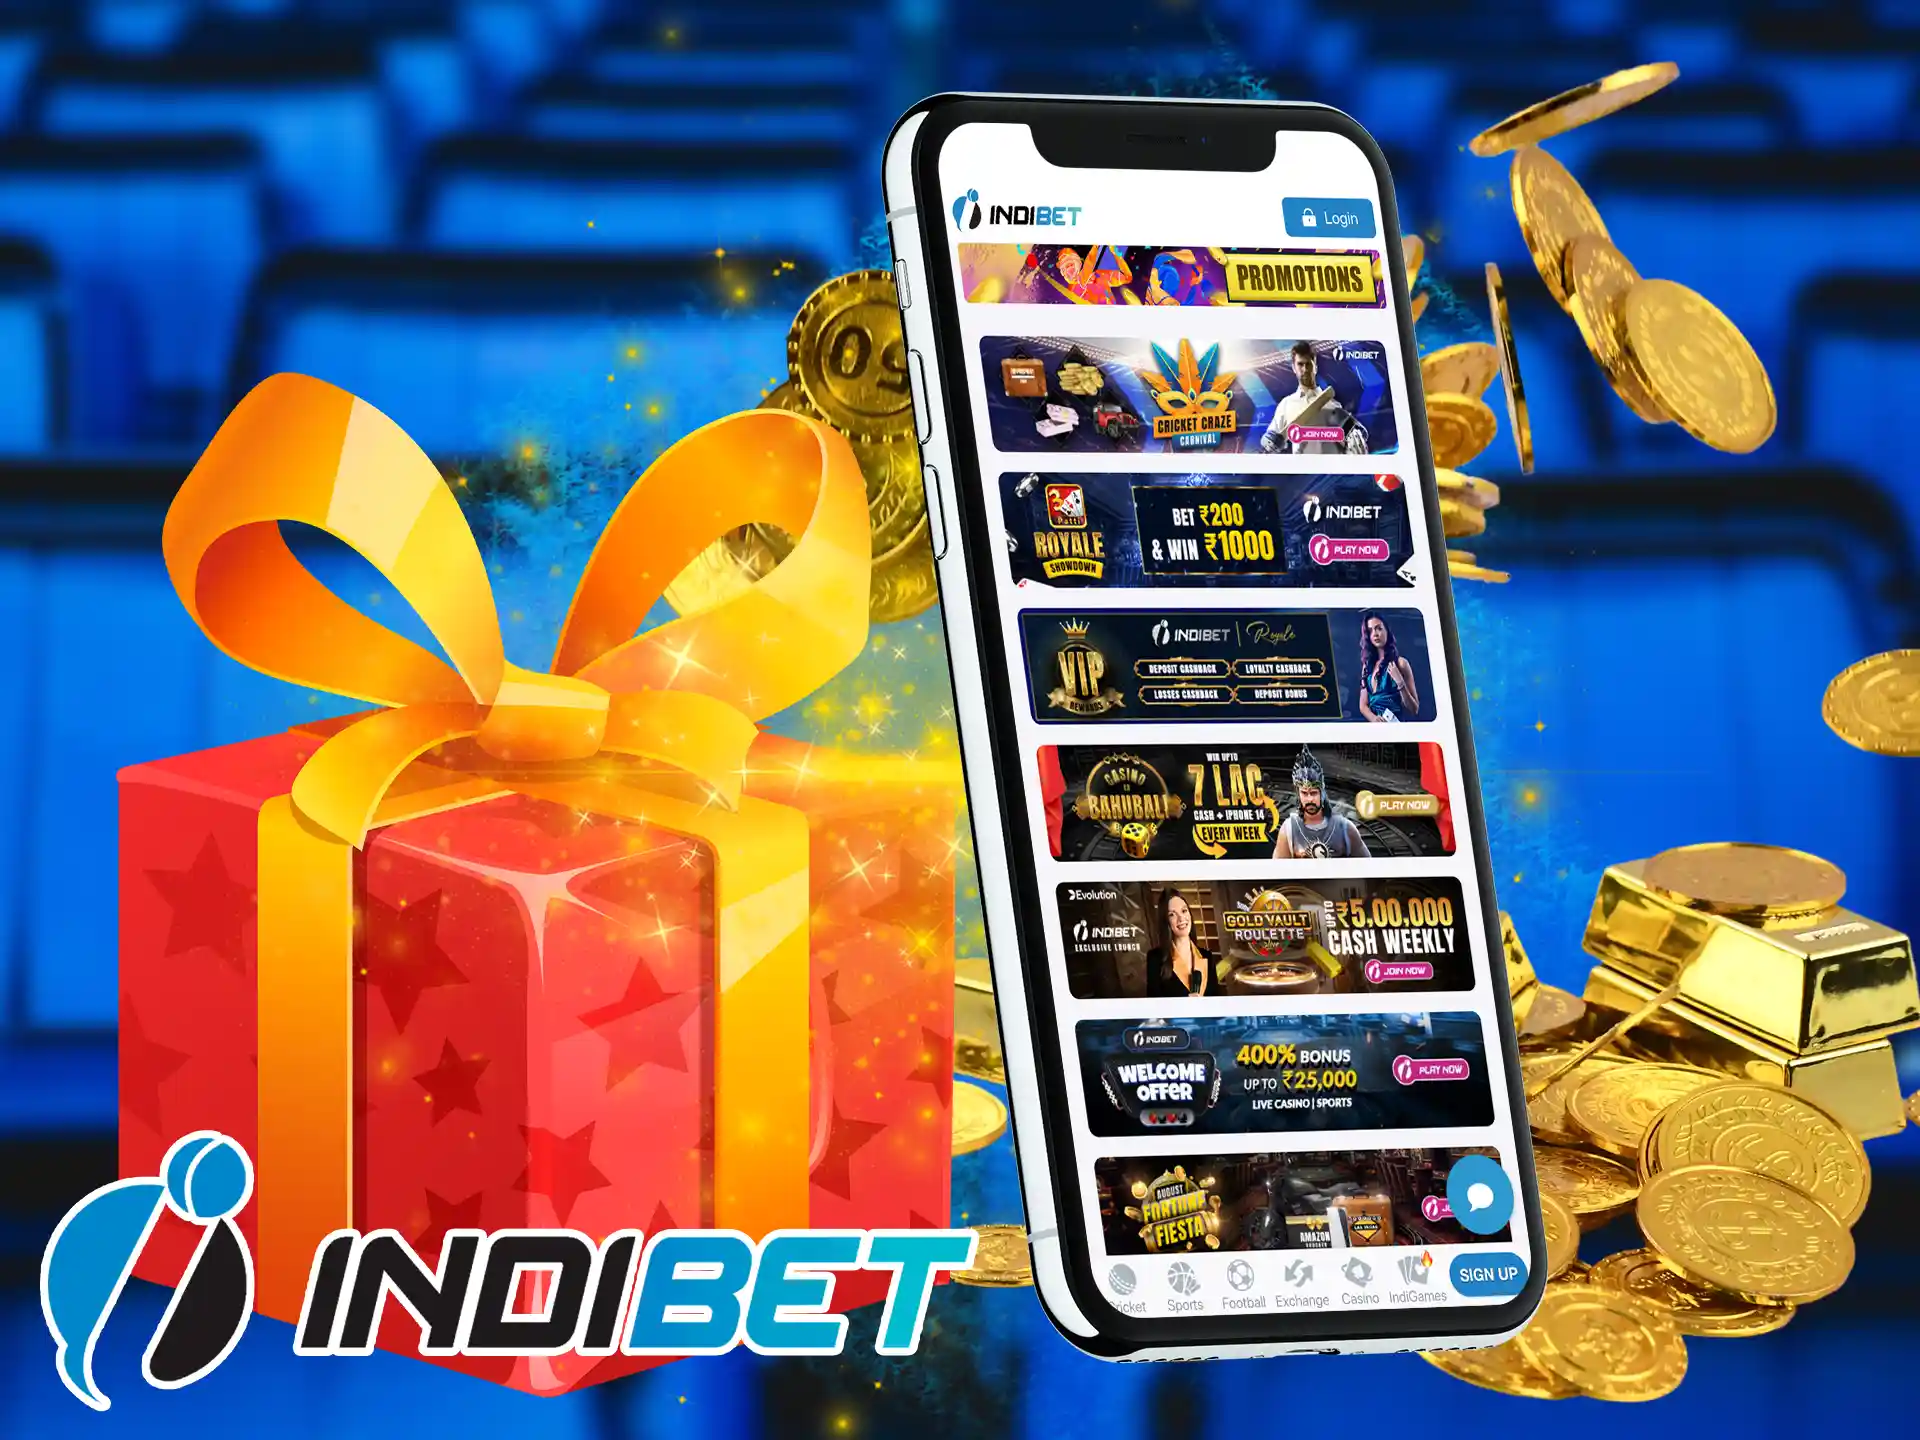 Get generous prizes from Indibet that can be used in both casino and sports betting.